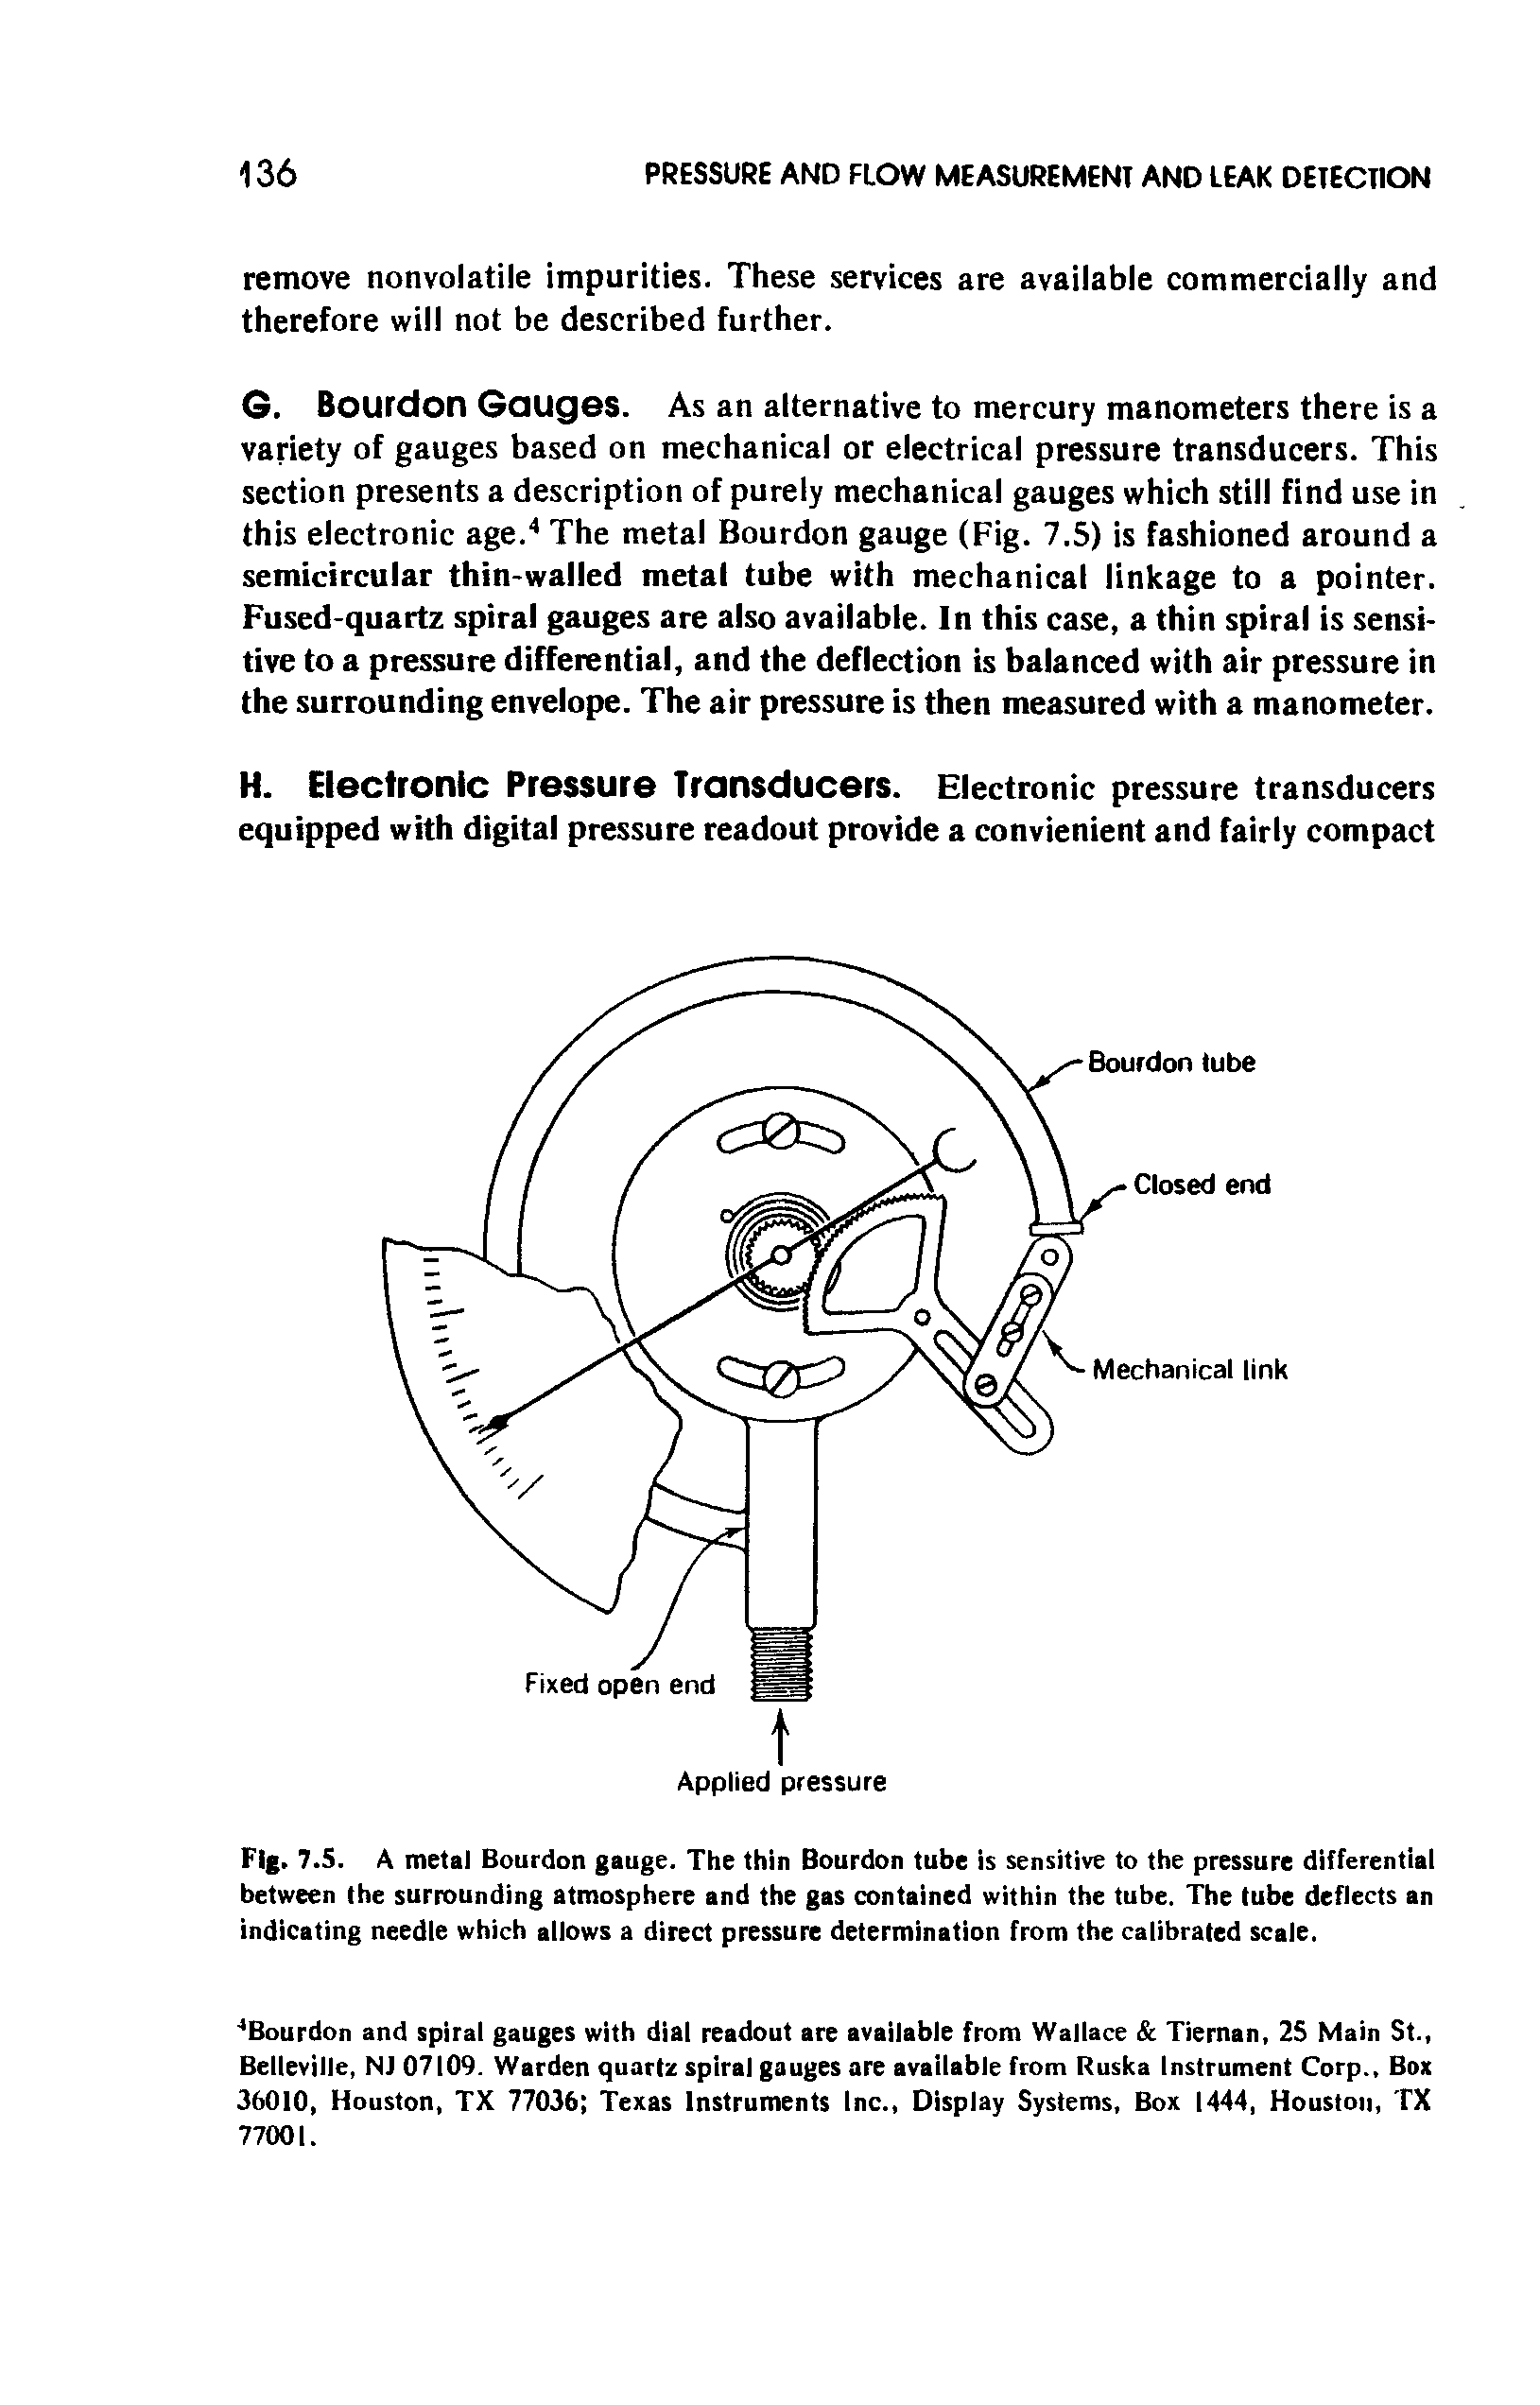 Fig. 7.5. A metal Bourdon gauge. The thin Bourdon tube is sensitive to the pressure differential between the surrounding atmosphere and the gas contained within the tube. The tube deflects an indicating needle which allows a direct pressure determination from the calibrated scale.